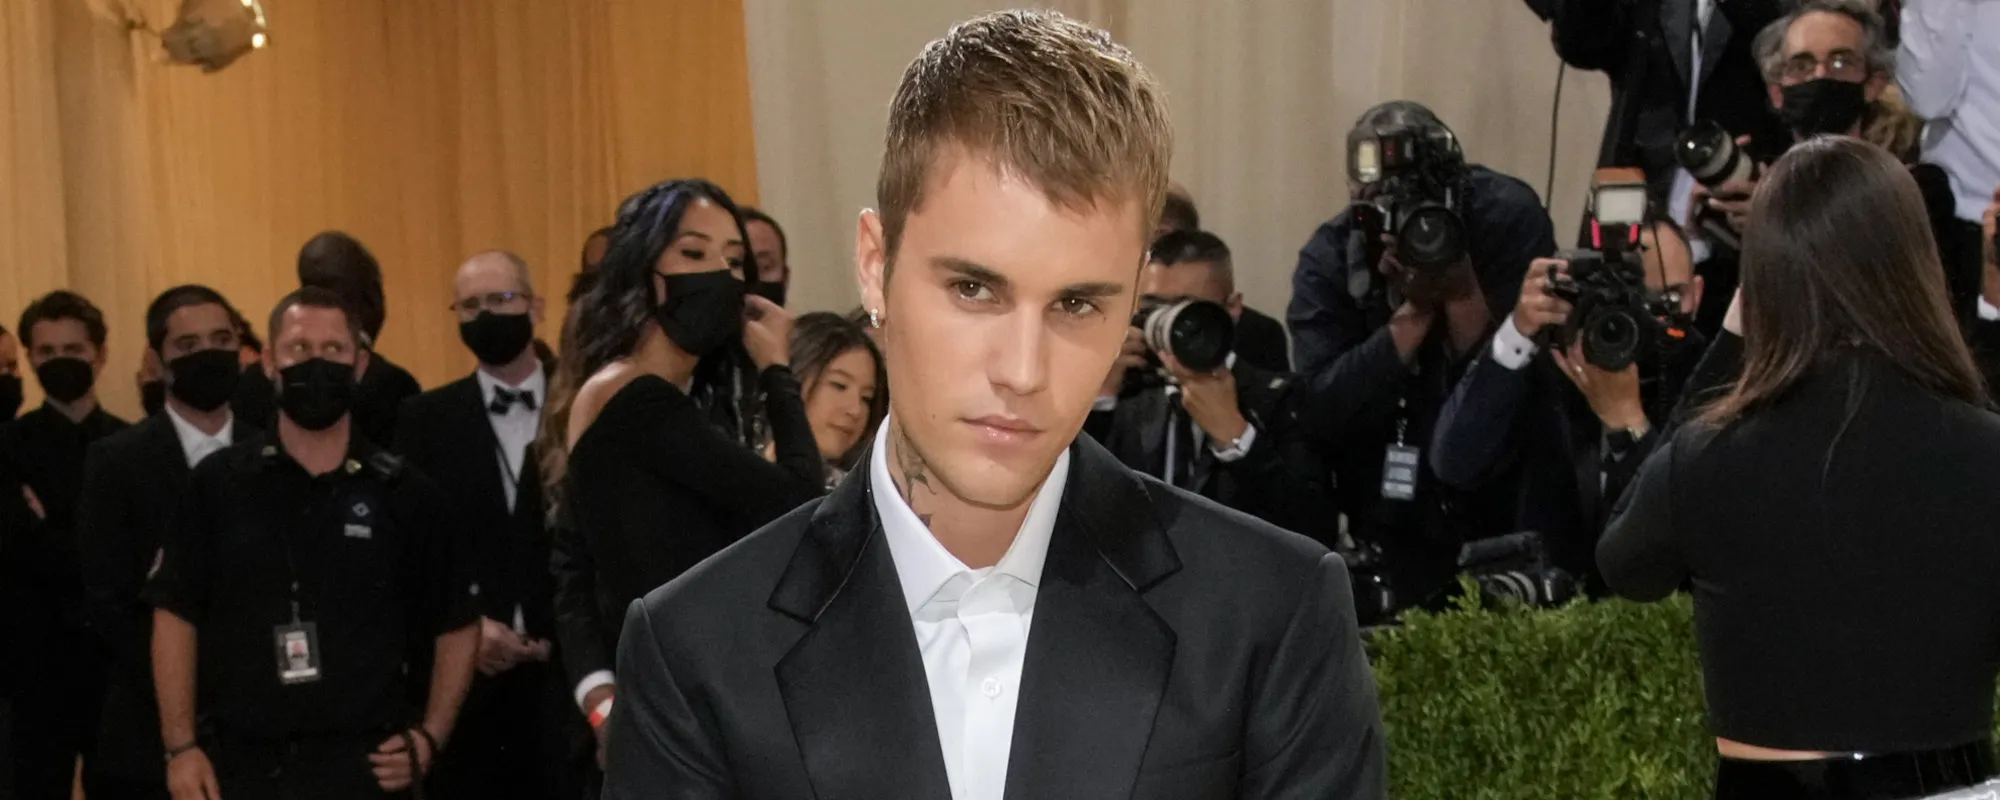 Justin Bieber Gives an Health Update on His Facial Paralysis